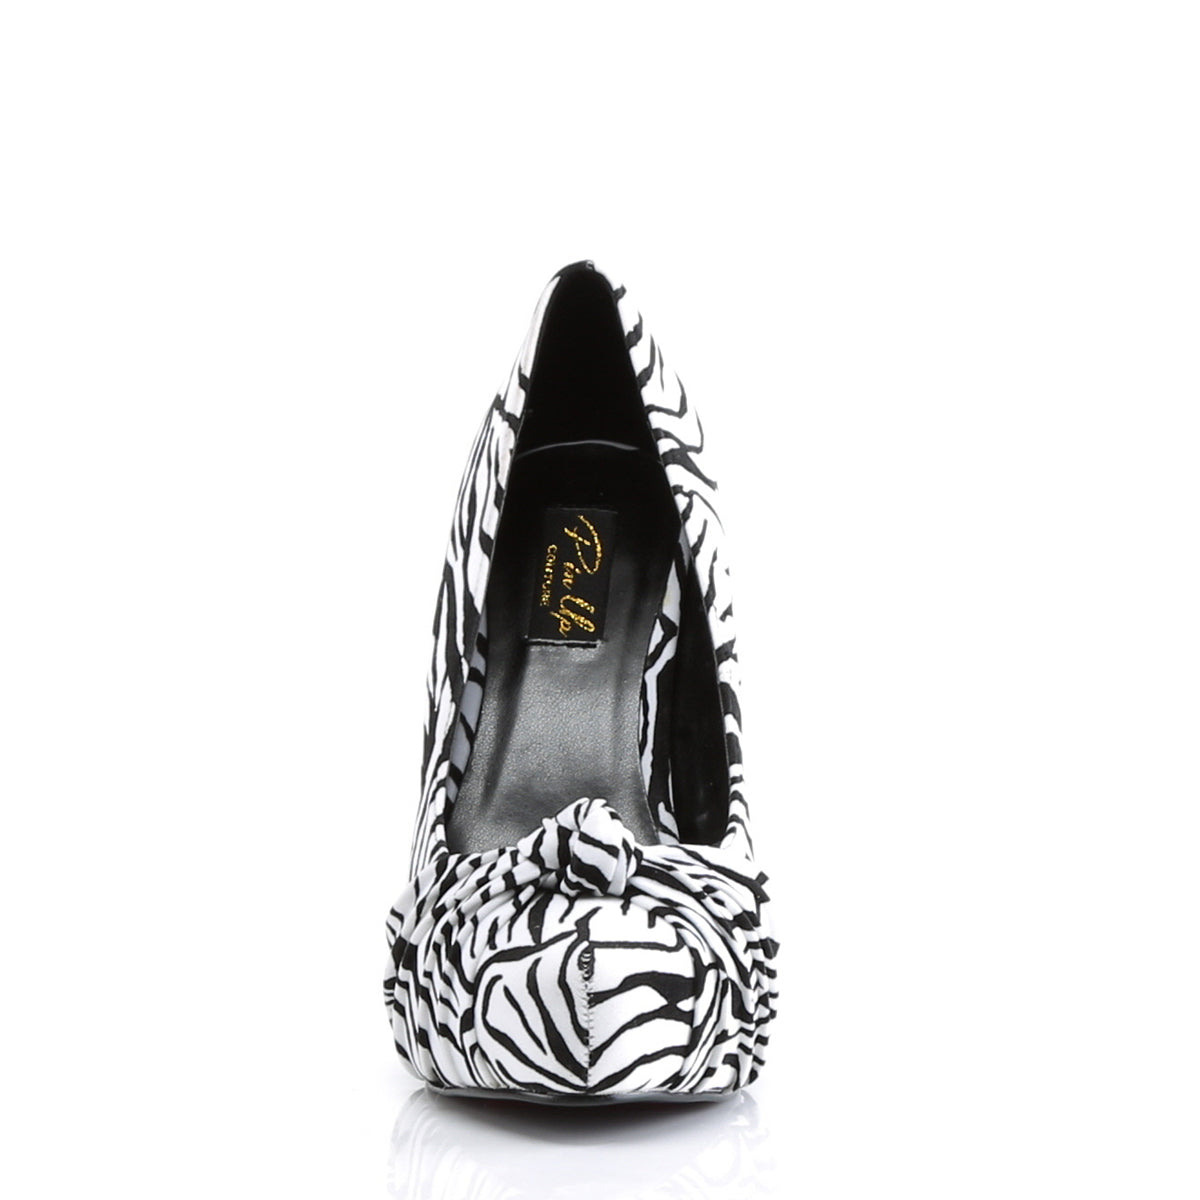 SAFARI-06 Pin Up Couture Black White Zebra Print Platforms-Pin Up Couture- Sexy Shoes Alternative Footwear